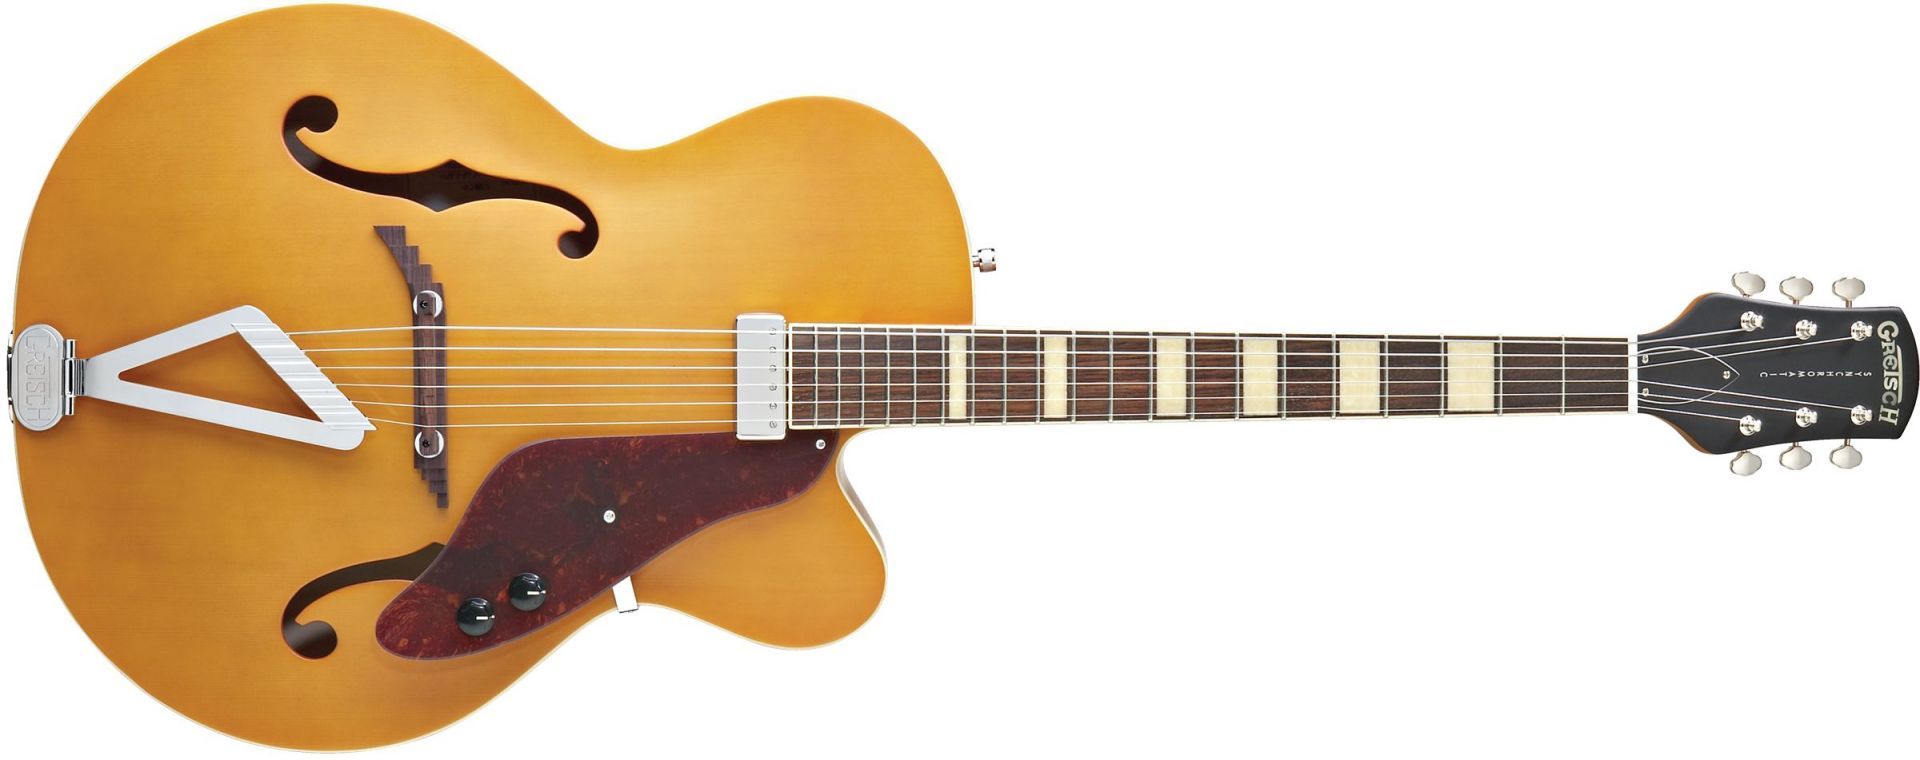 Gretsch Guitars G100BKCE Synchromatic Archtop Single-Cut with Synchromatic Tailpiece Natural